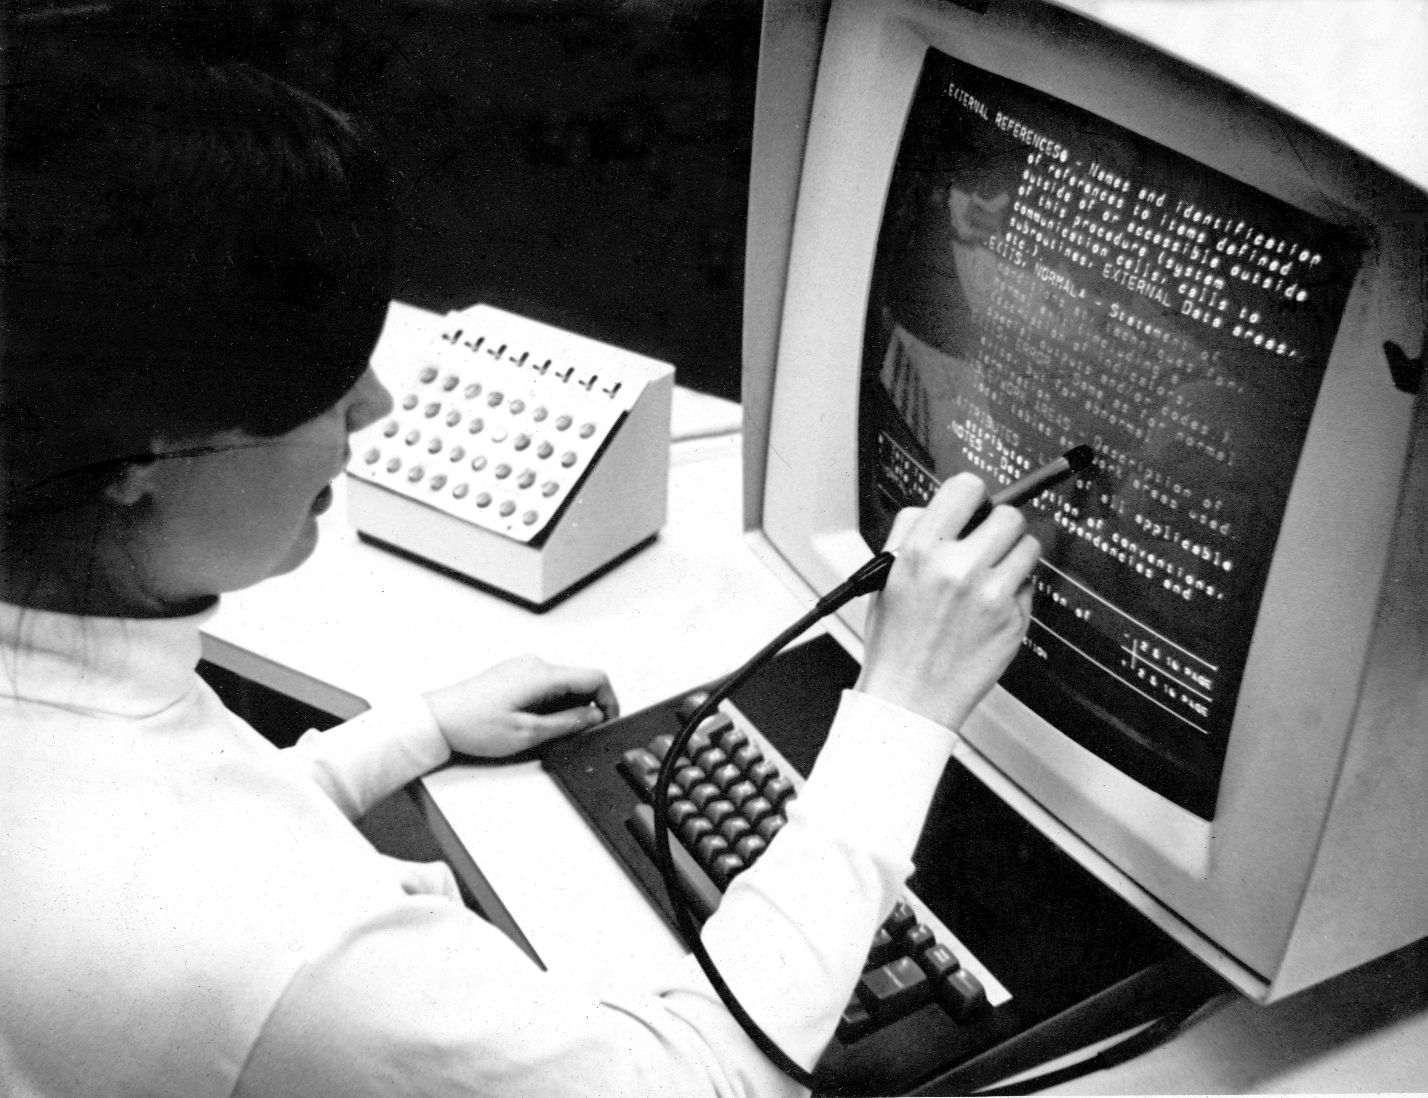 Photo by Greg Lloyd 1969, Photo of Hypertext Editing System (HES) console at Brown University, circa October 1969.